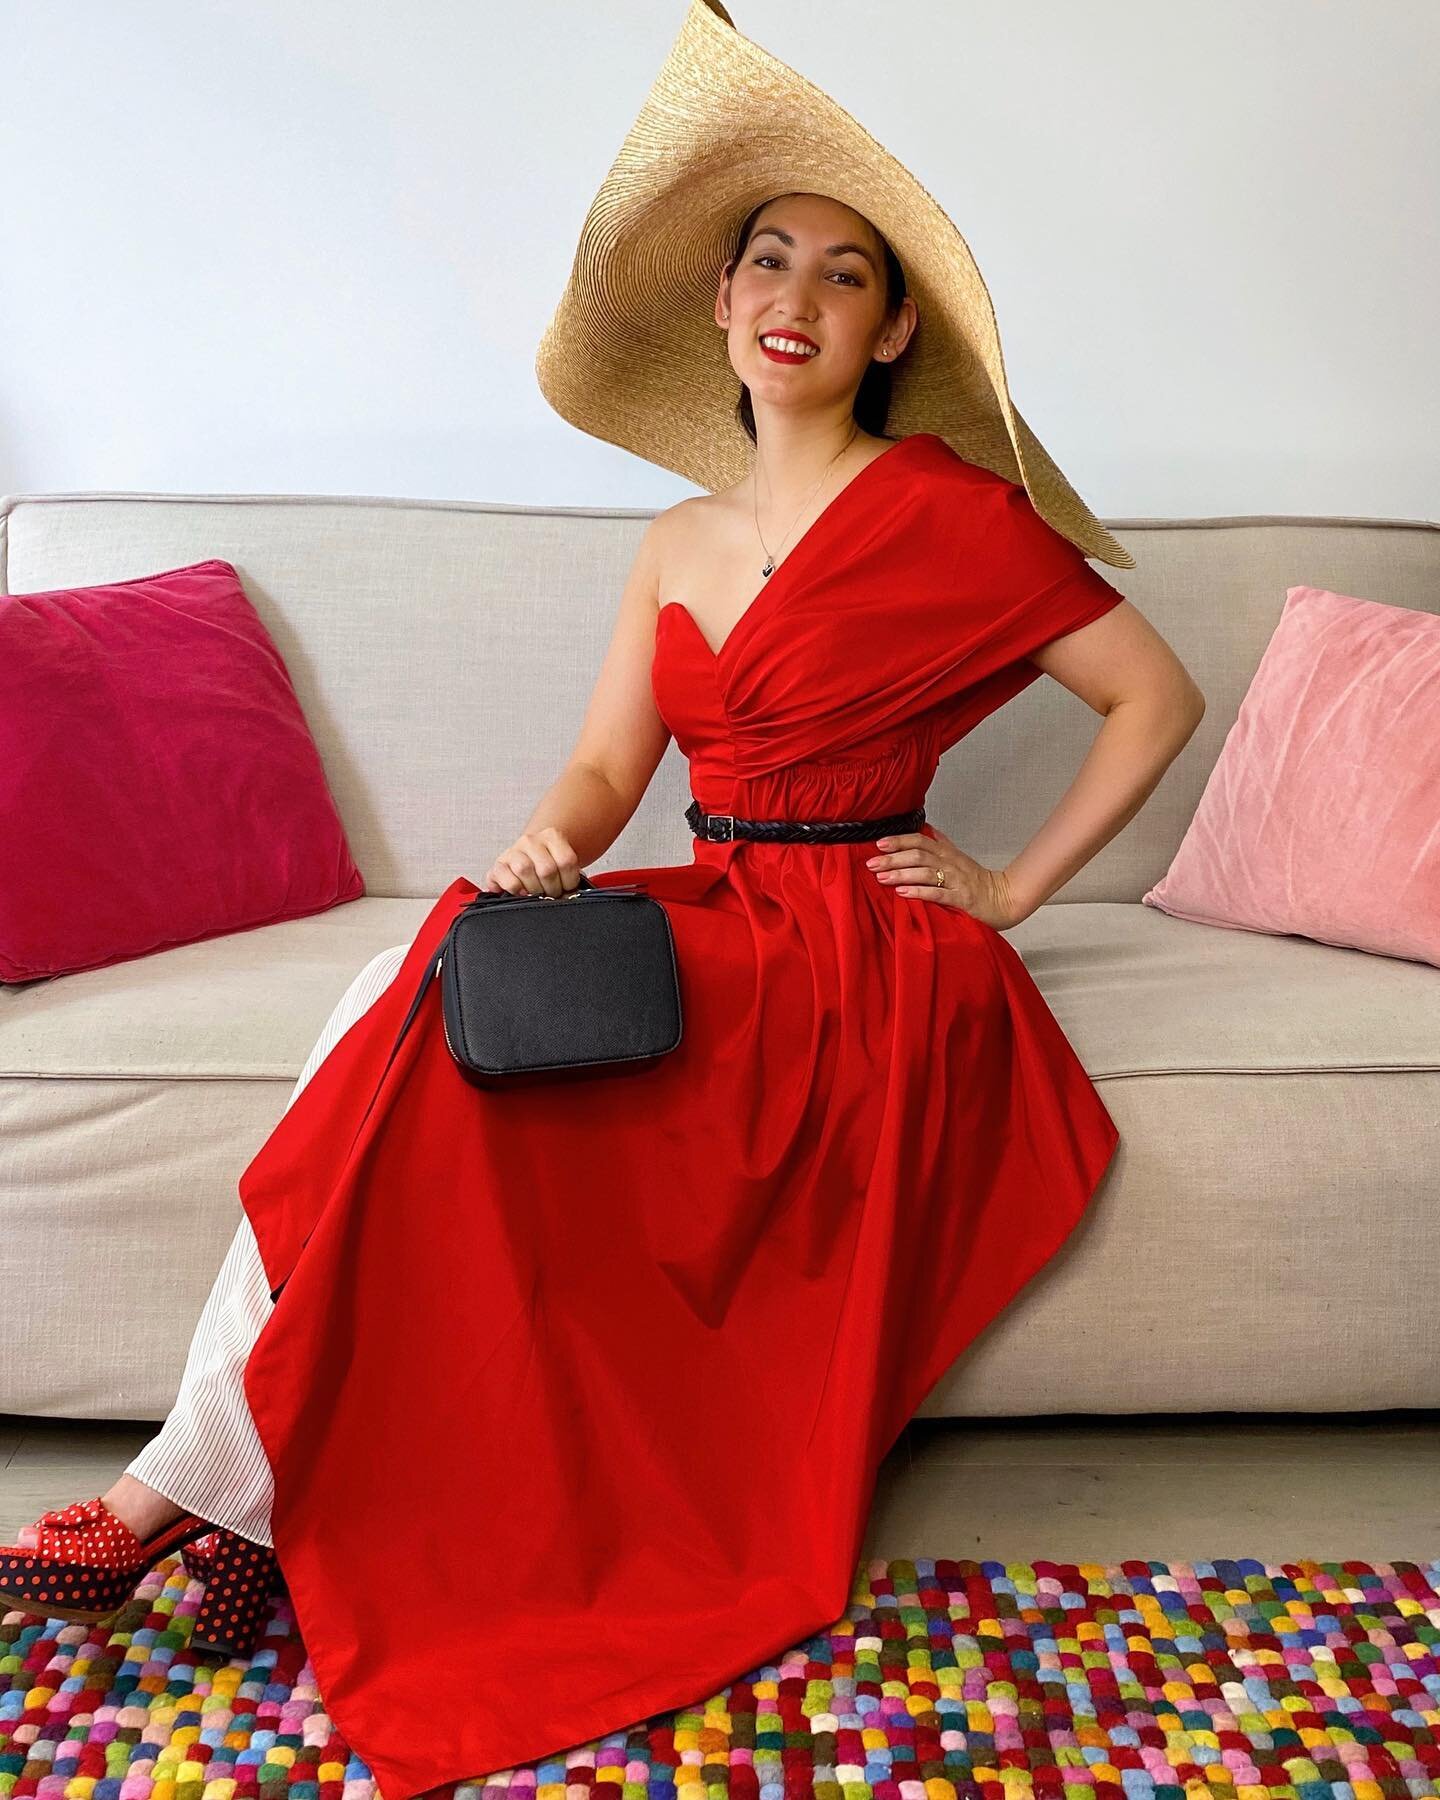 Today I should be at Royal Randwick for Fujitsu George Main Stakes Day 🏇... instead I&rsquo;m in Melbourne, sitting at home in a splash of red ❣️ @atc_races 

Outfit details: 
👒Jacquemus, 
👚made by me
👖Asilio
👠Tabitha Simmons 

#StyleStakes #Eve